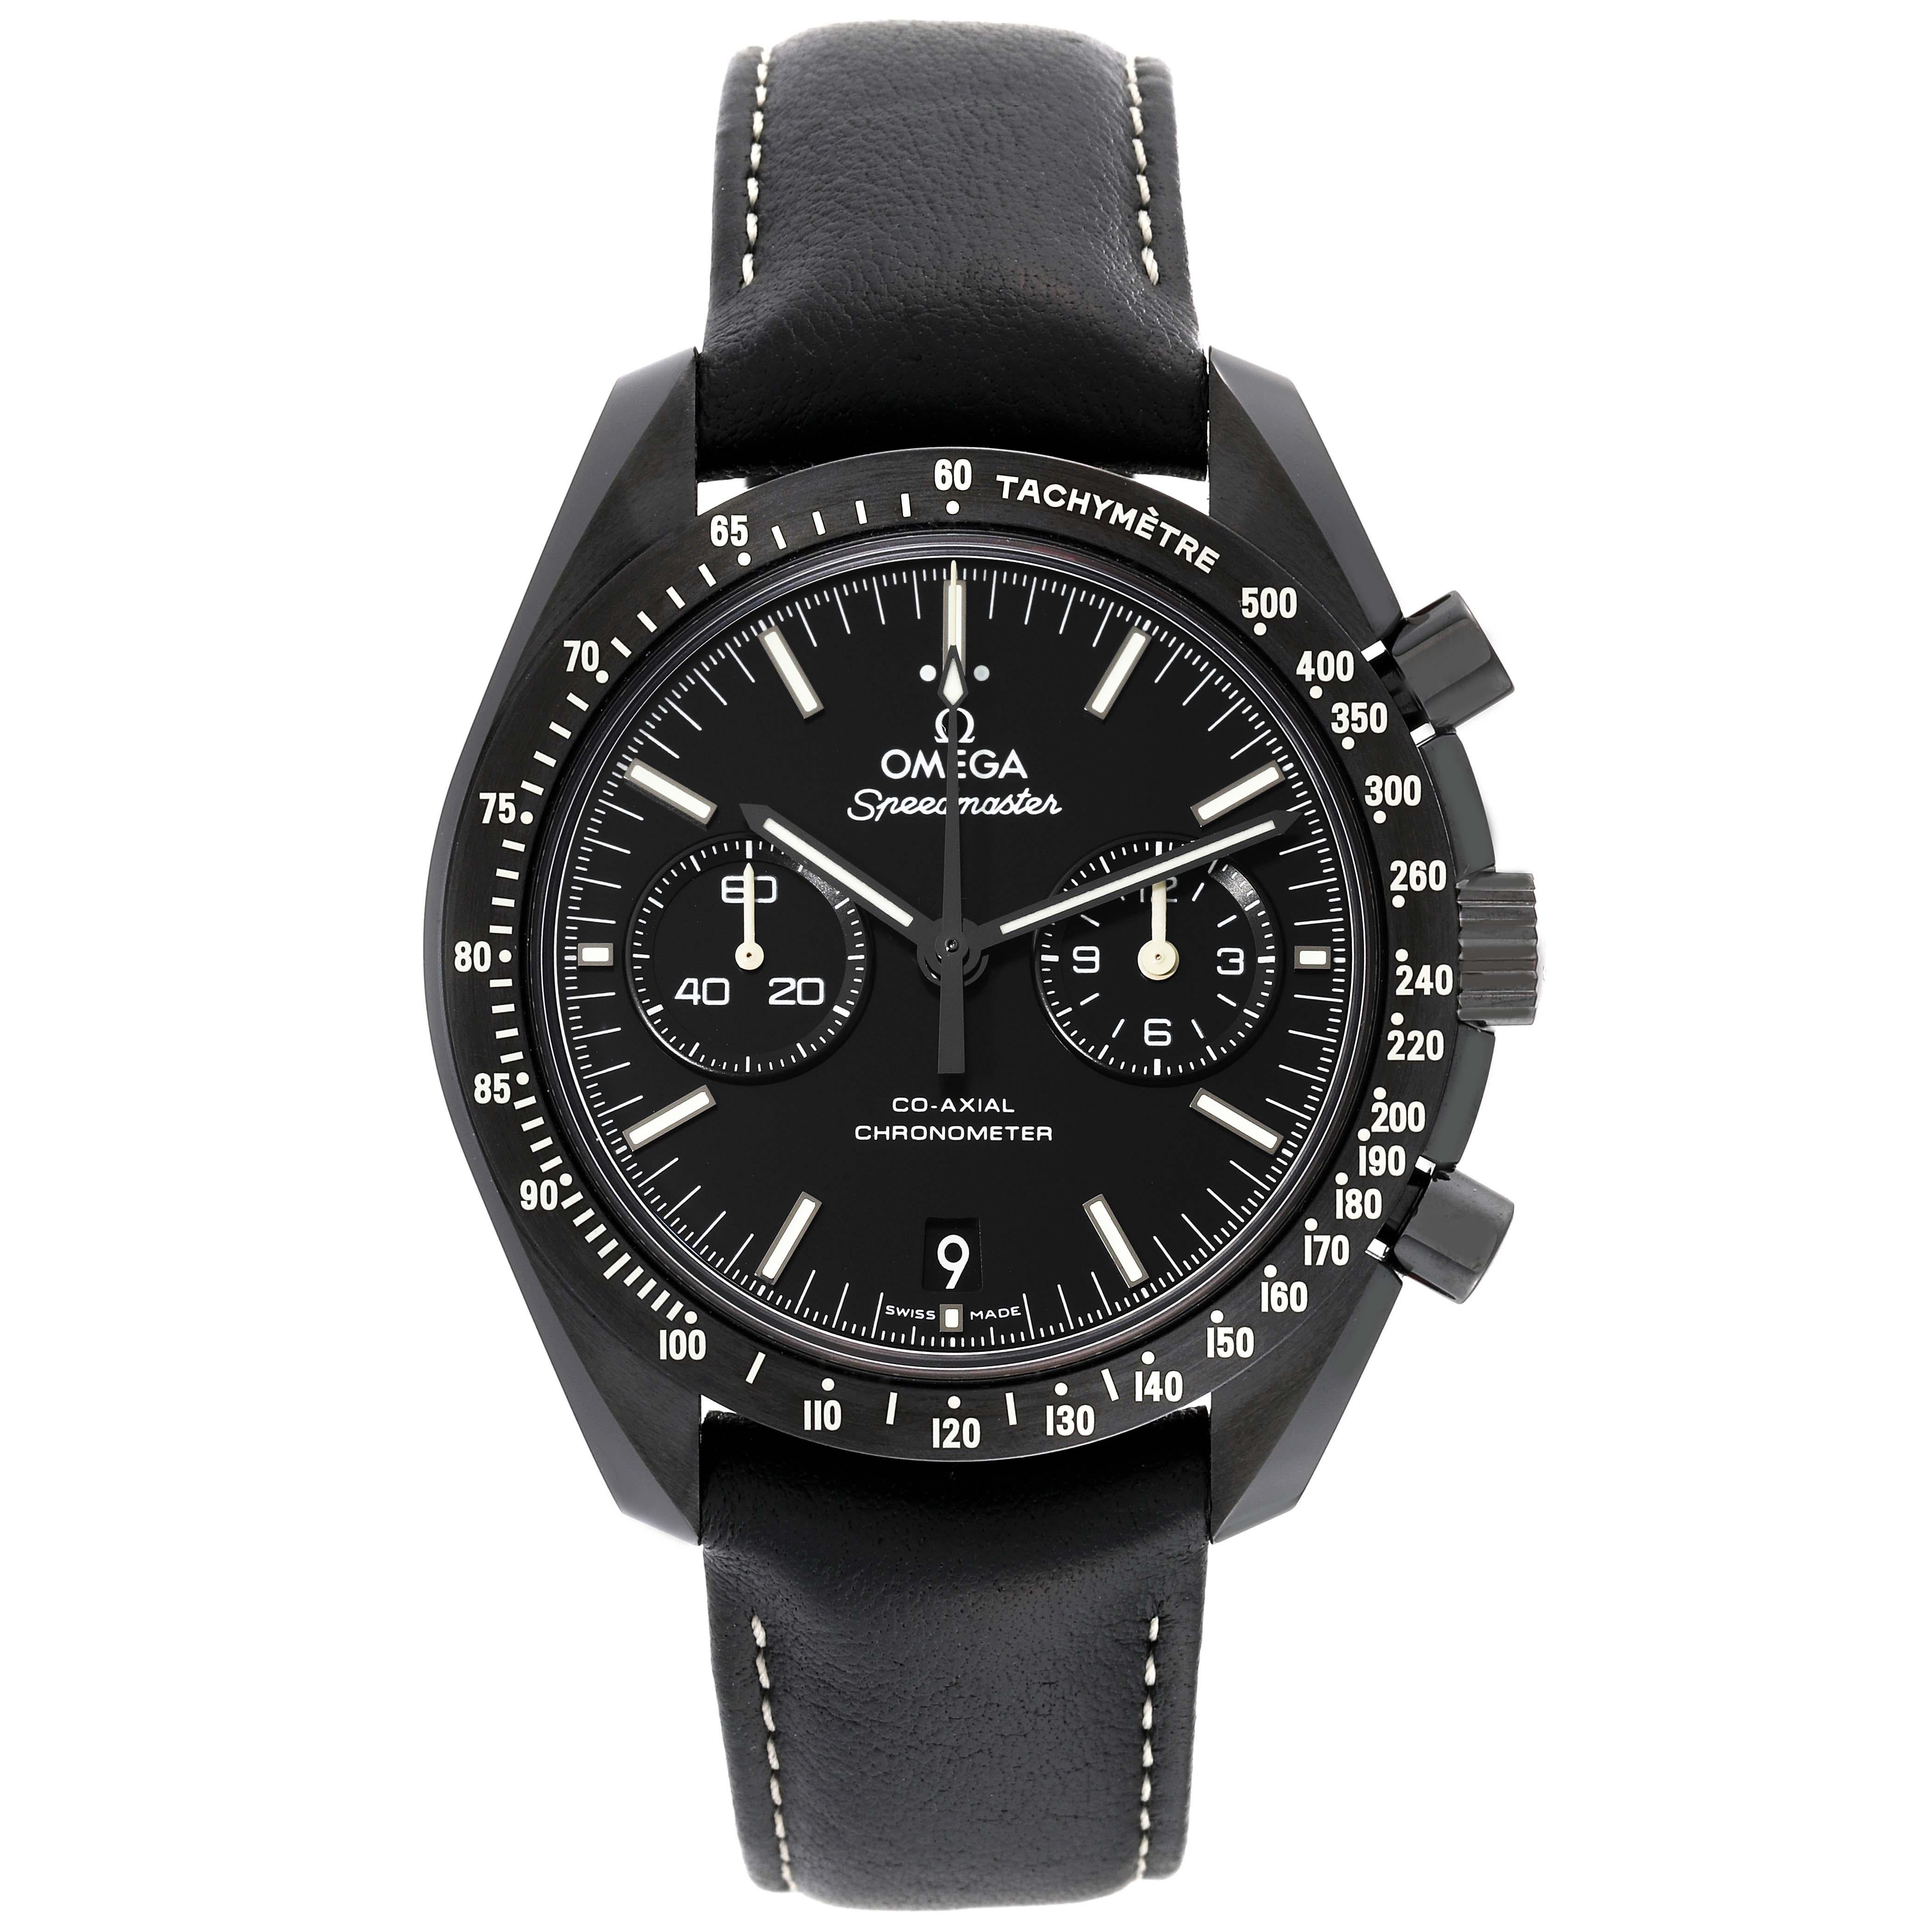 Omega Speedmaster Pitch Dark Side of the Moon Mens Watch 311.92.44.51.01.004 For Sale 5